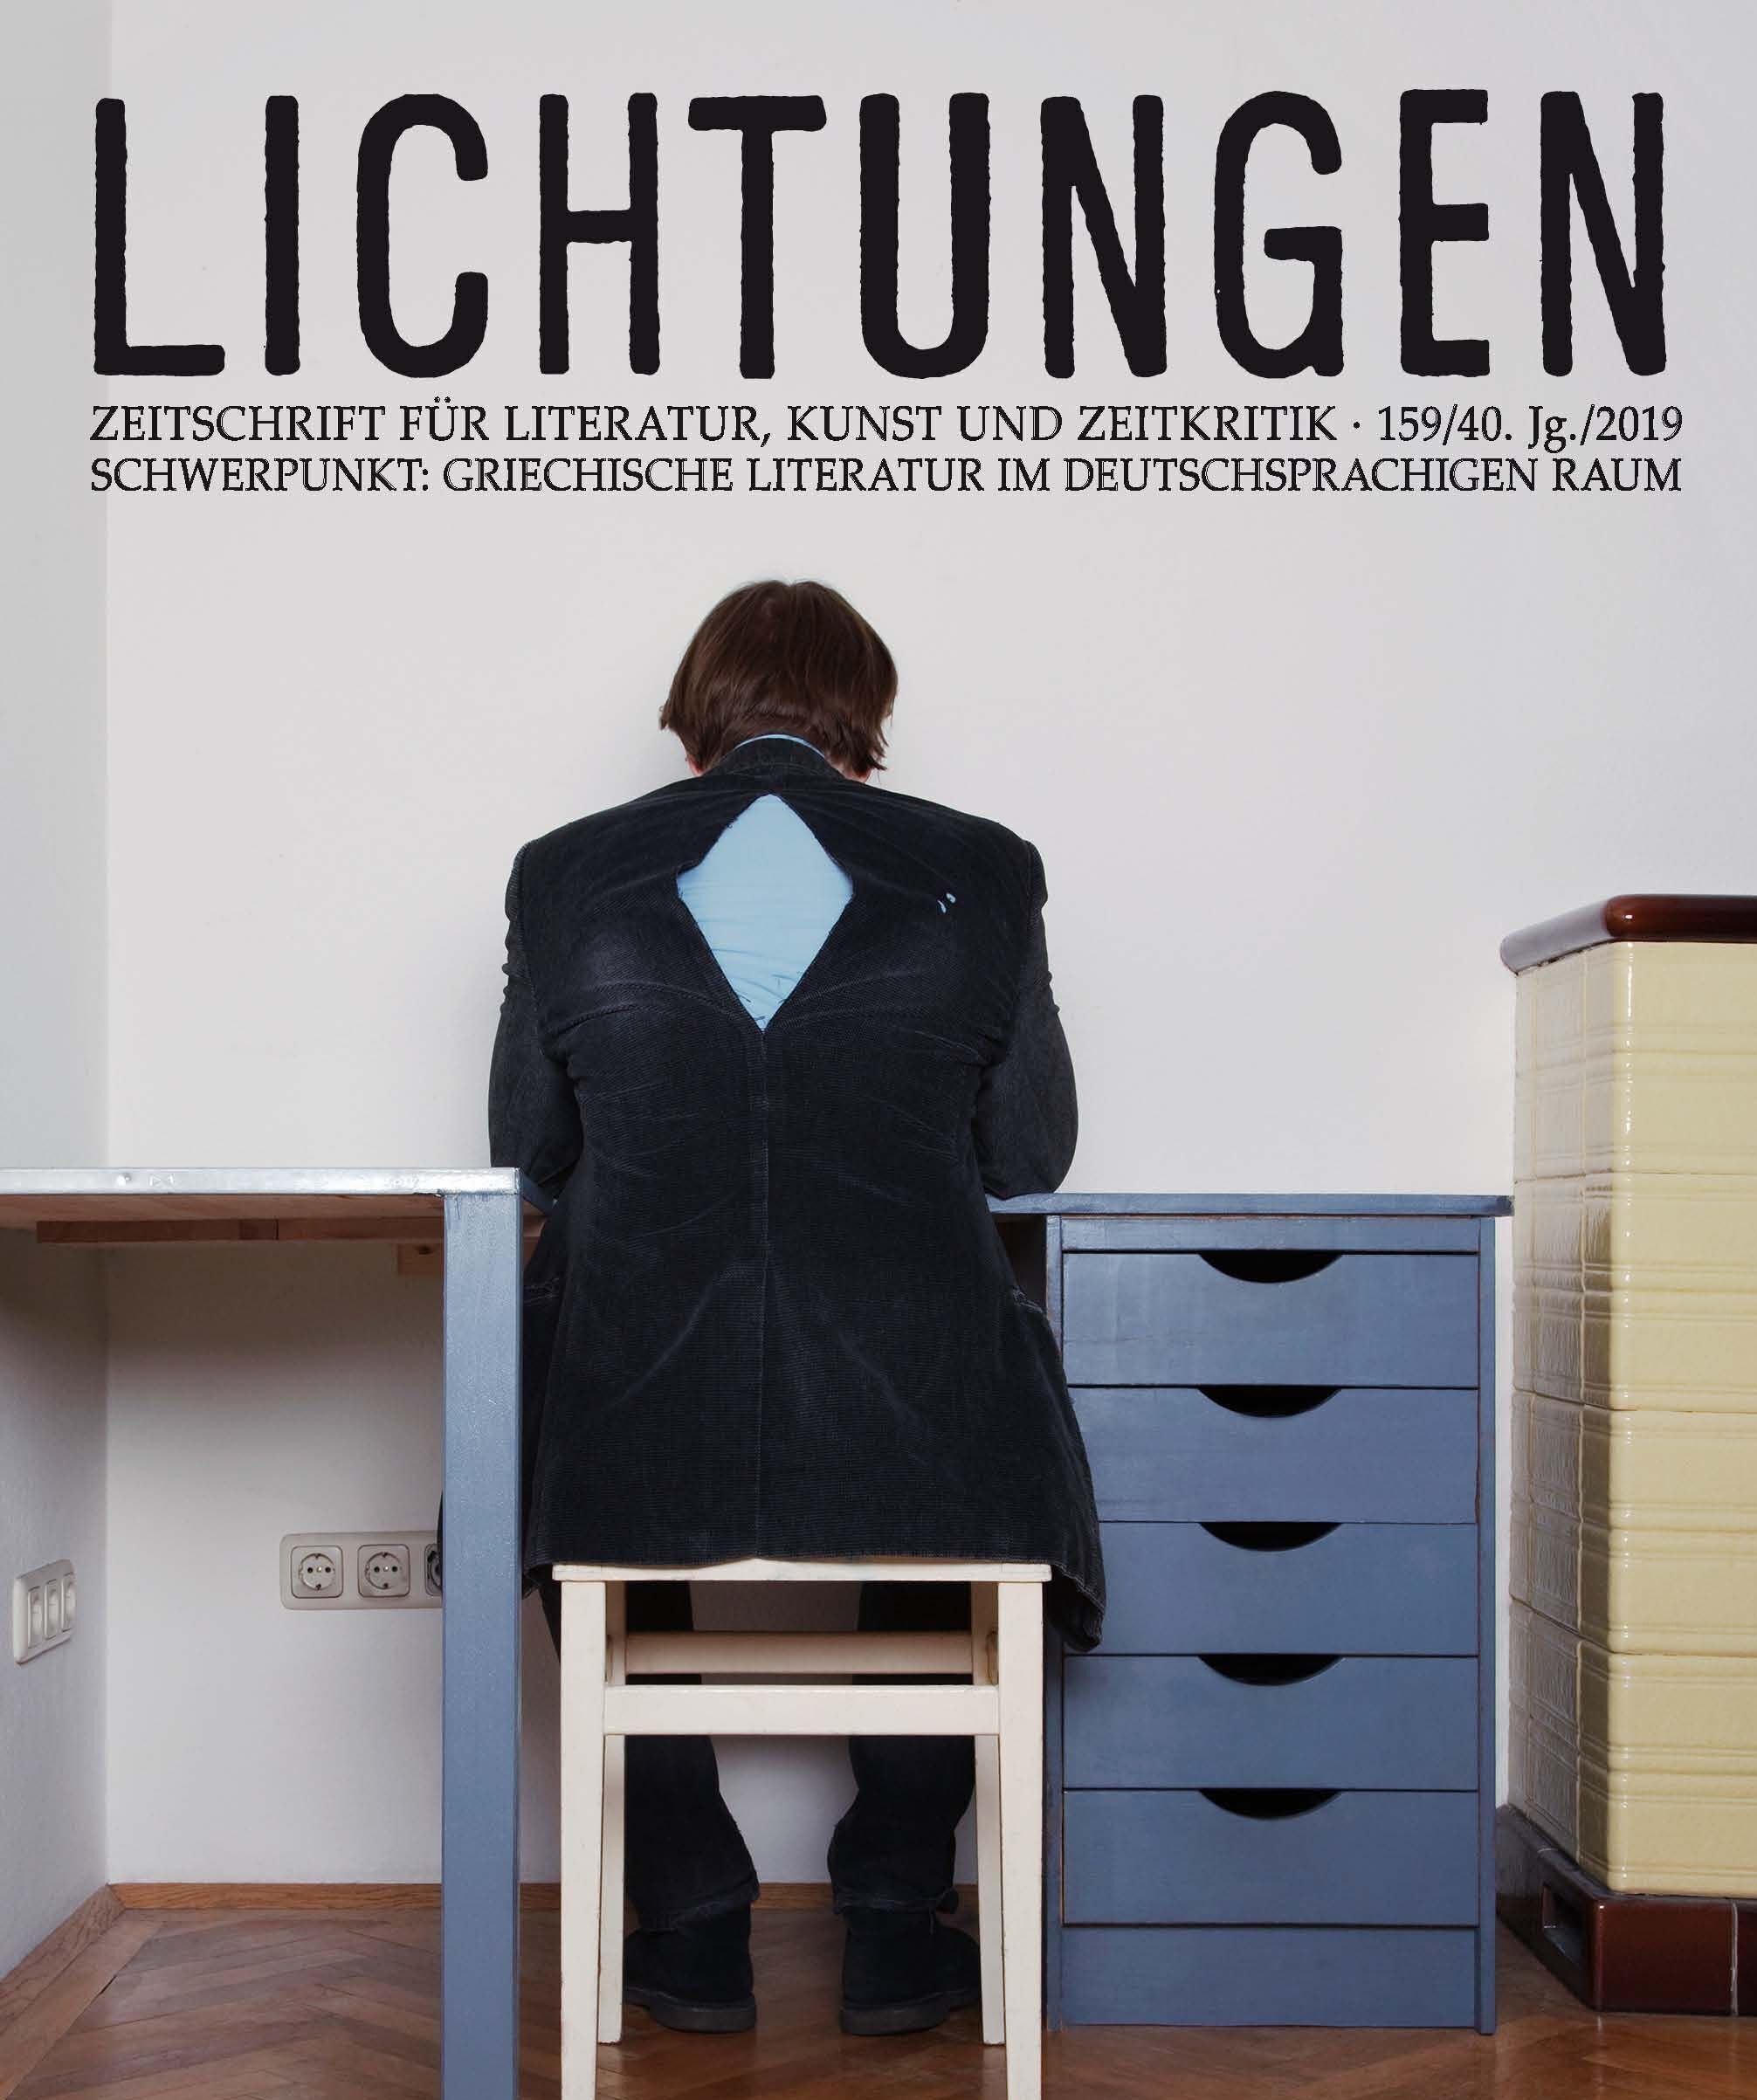 The Short Play ‘A Breath Of Freedom’ From SPLINTERS By Nina Rapi Is Published In German In The Literary Magazine Lichtungen, 2019